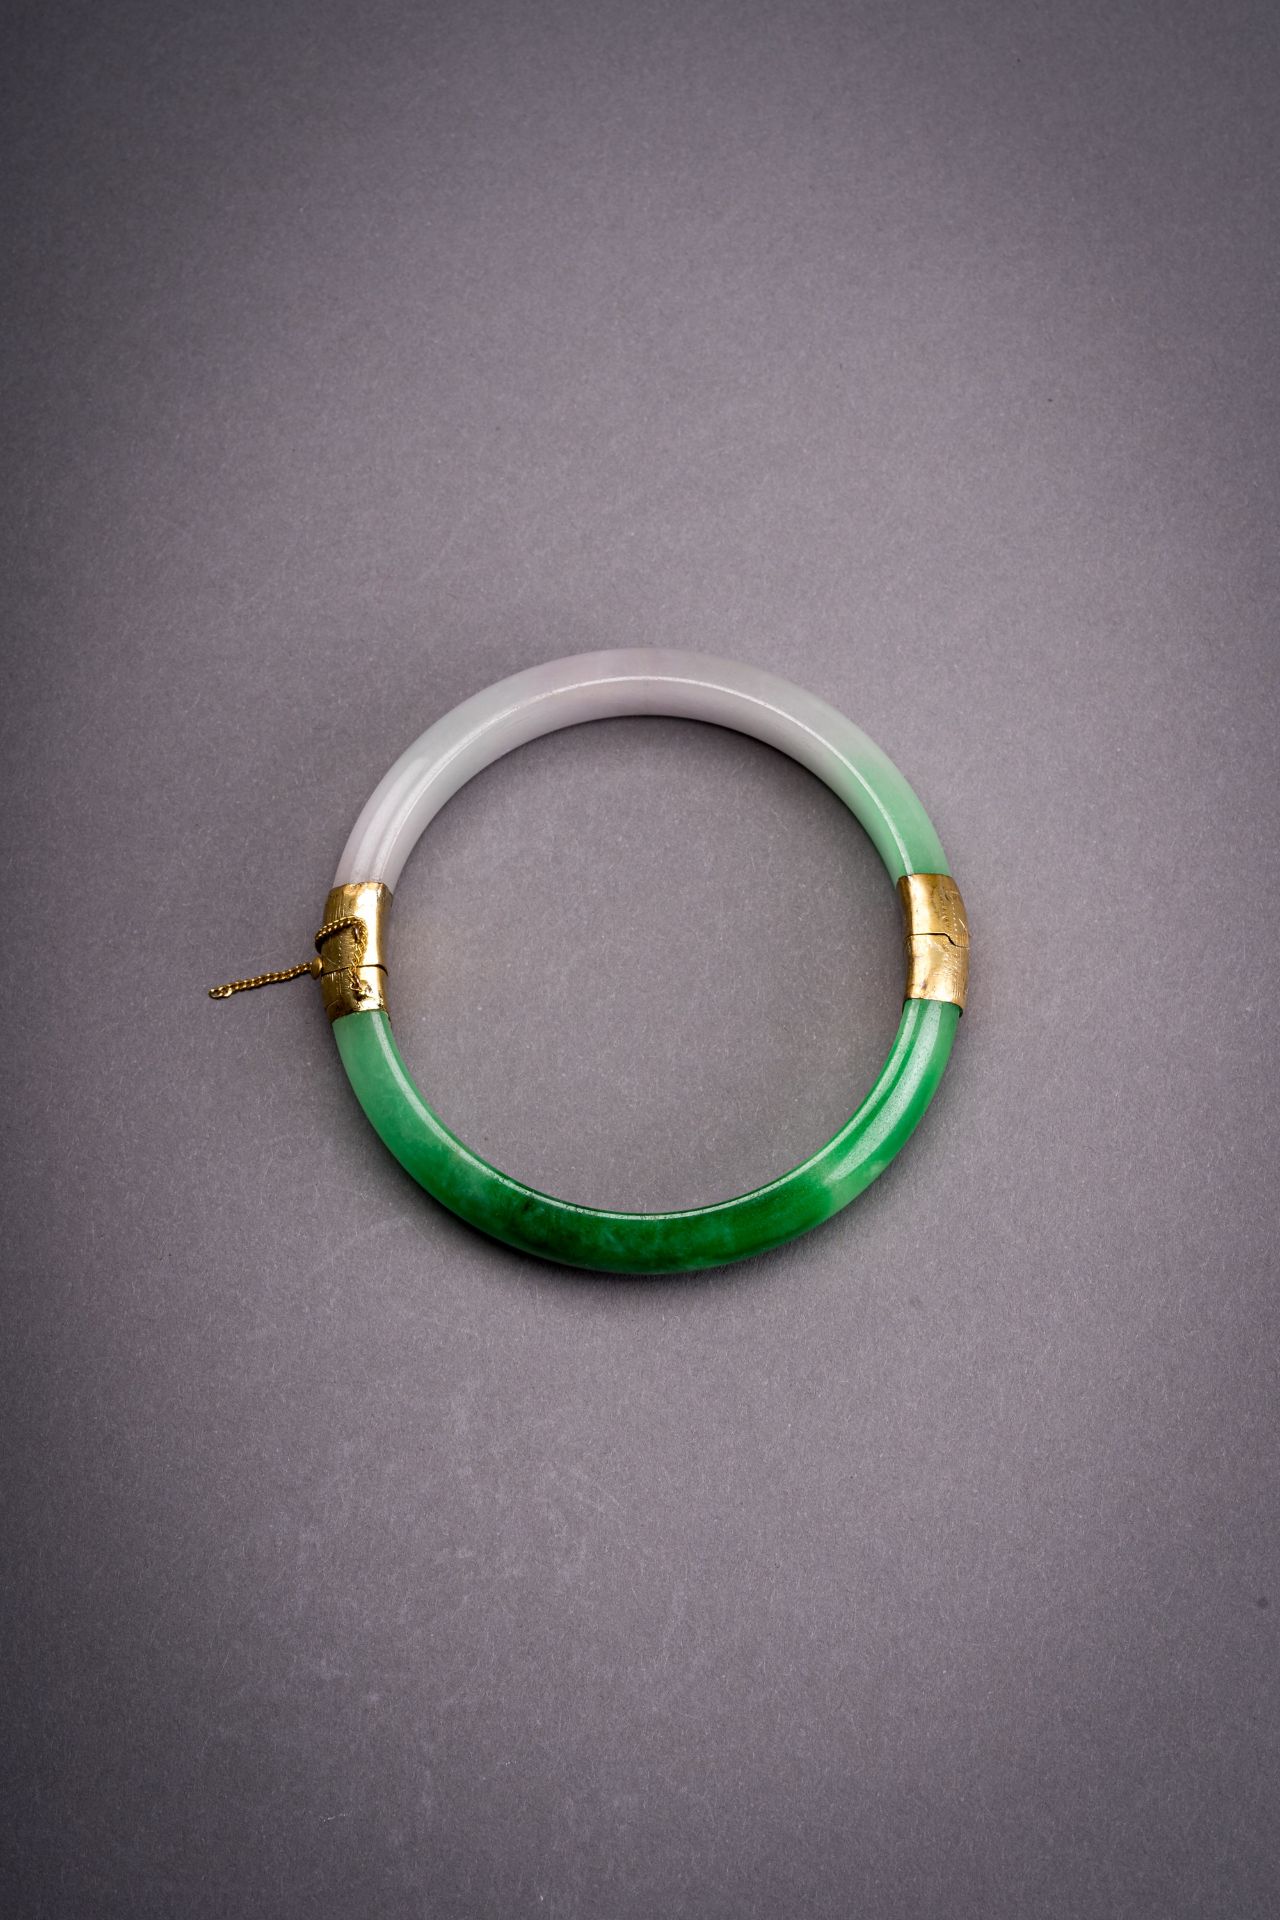 A PALE LAVENDER AND EMERALD GREEN JADEITE BANGLE - Image 7 of 7